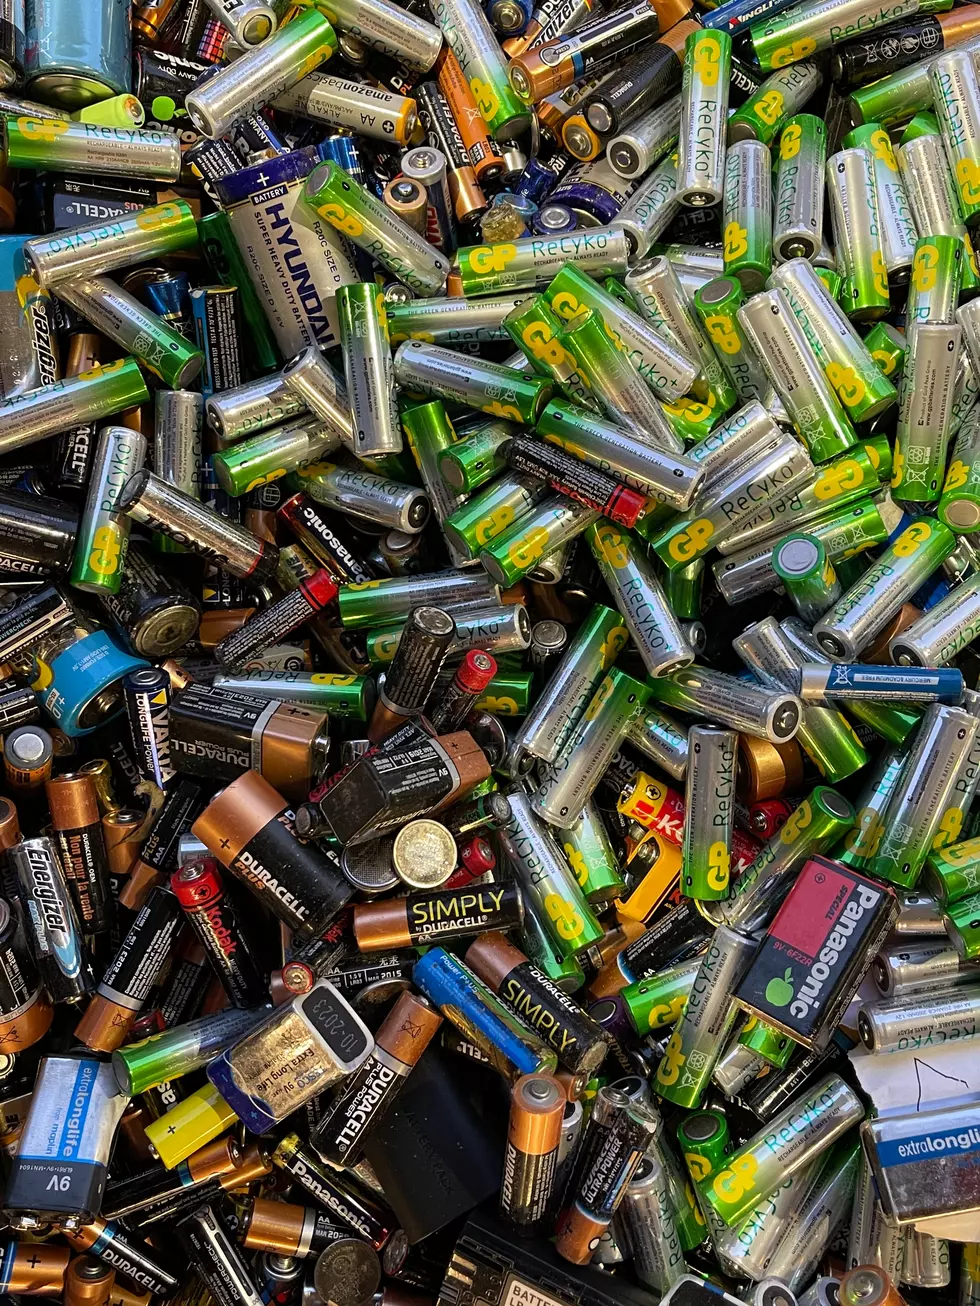 Is It Legal To Throw Away Batteries In Texas?